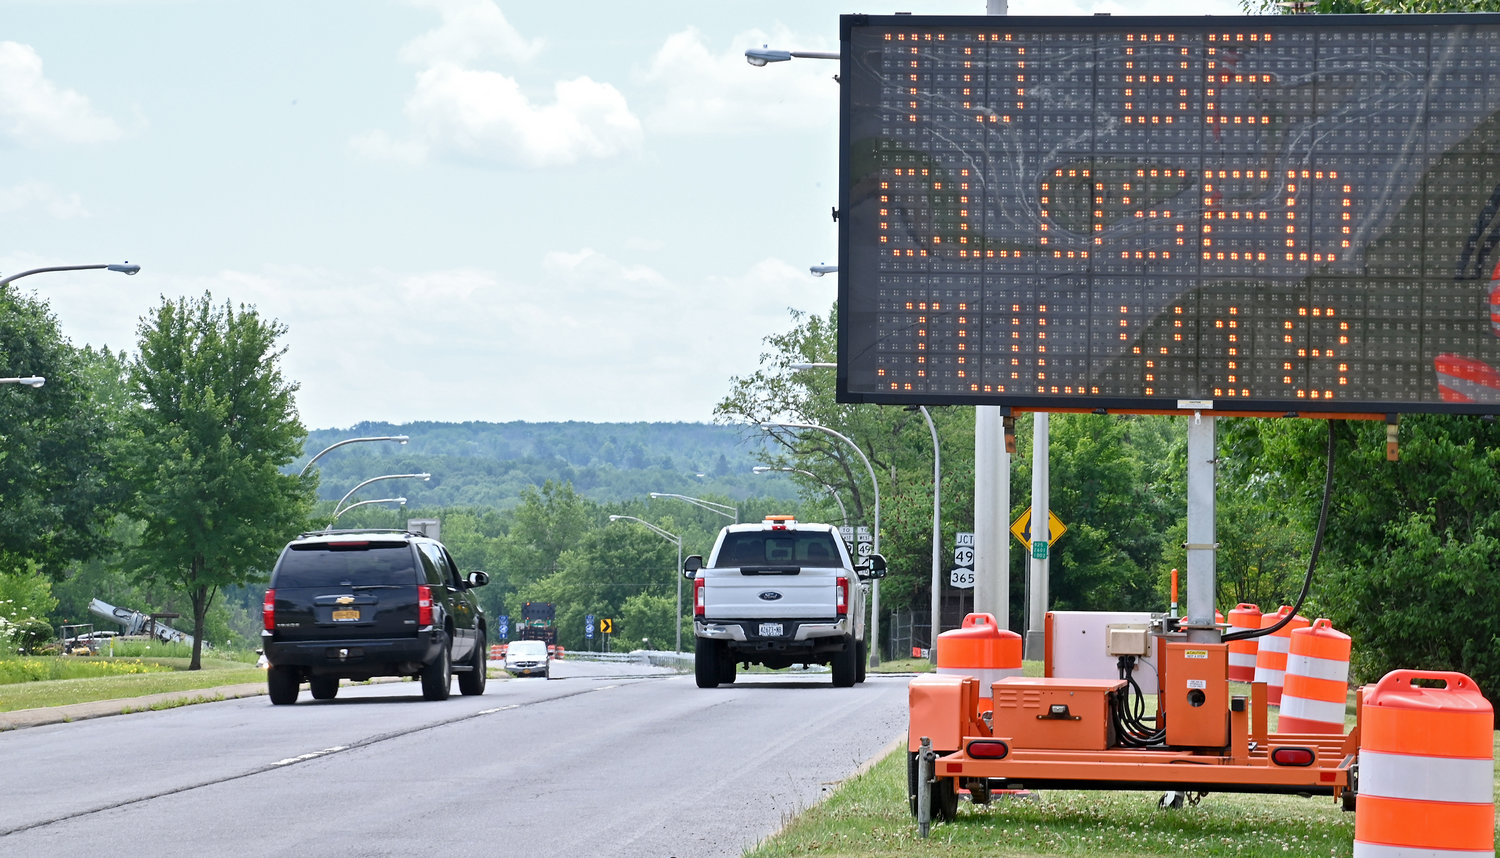 Cars depart the Griffiss Business and Technology Park on Route 825 toward the east and west ramp Wednesday afternoon. The Route 825 bridge over Route 365 will close to traffic at 6 p.m. on Monday, July 18, to facilitate repair work.  The work is expected to be complete in September.